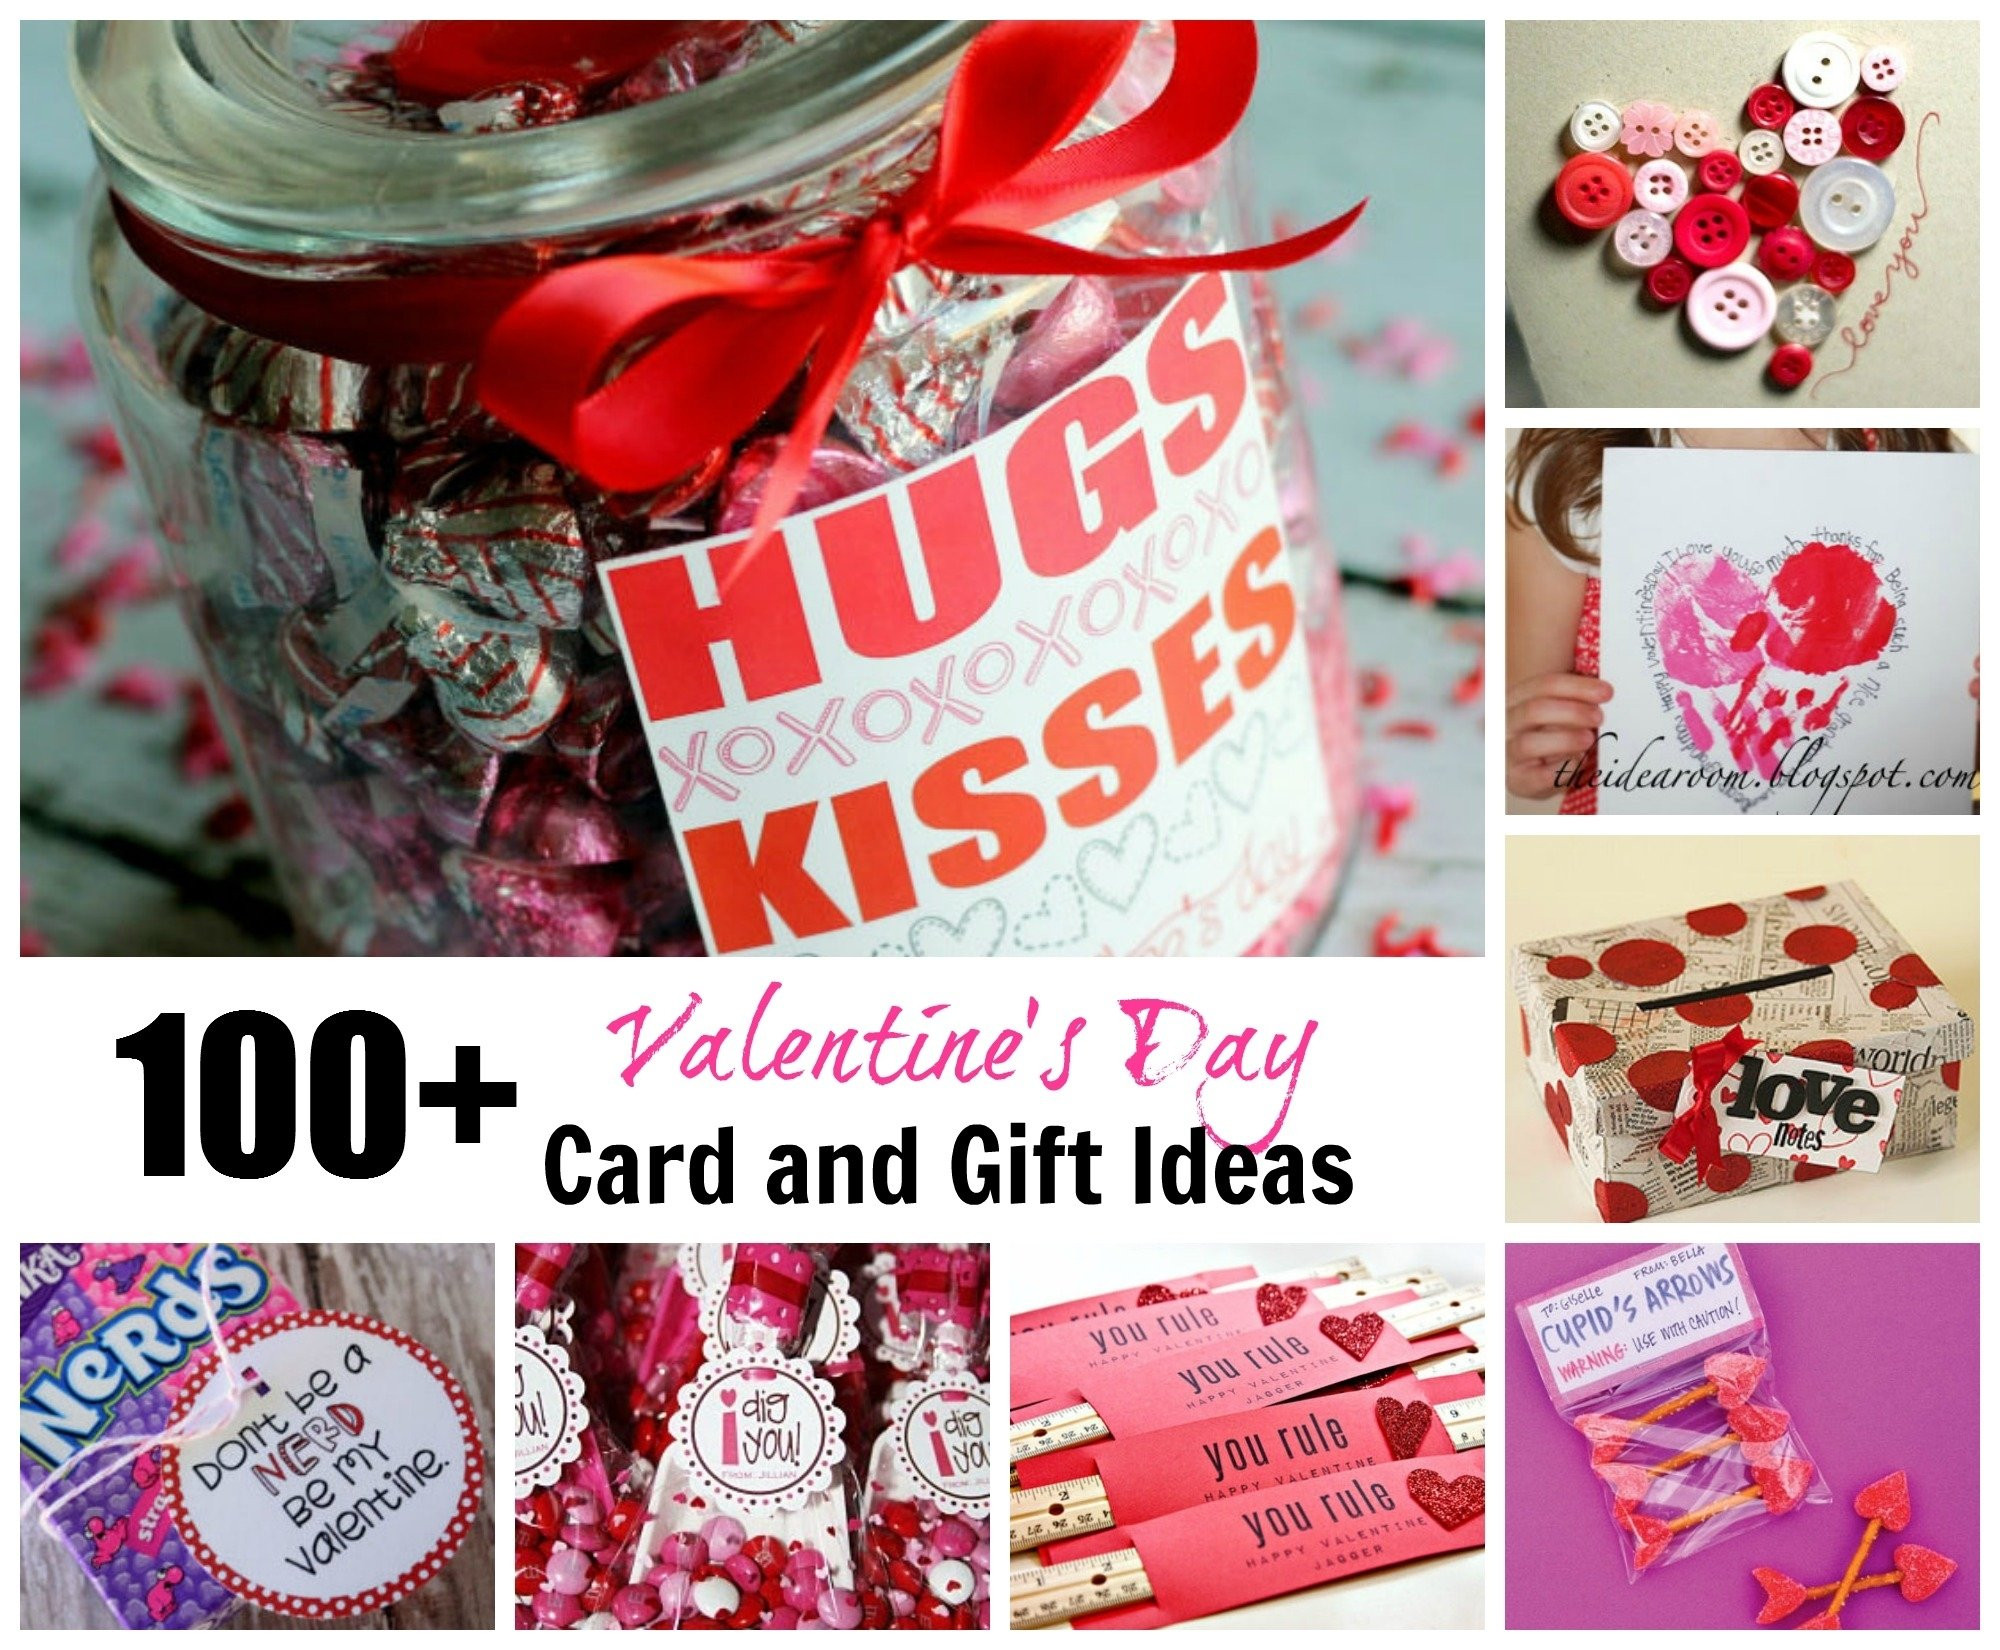 Valentines Gift Ideas For Him Homemade
 10 Lovable Homemade Valentines Ideas For Him 2020